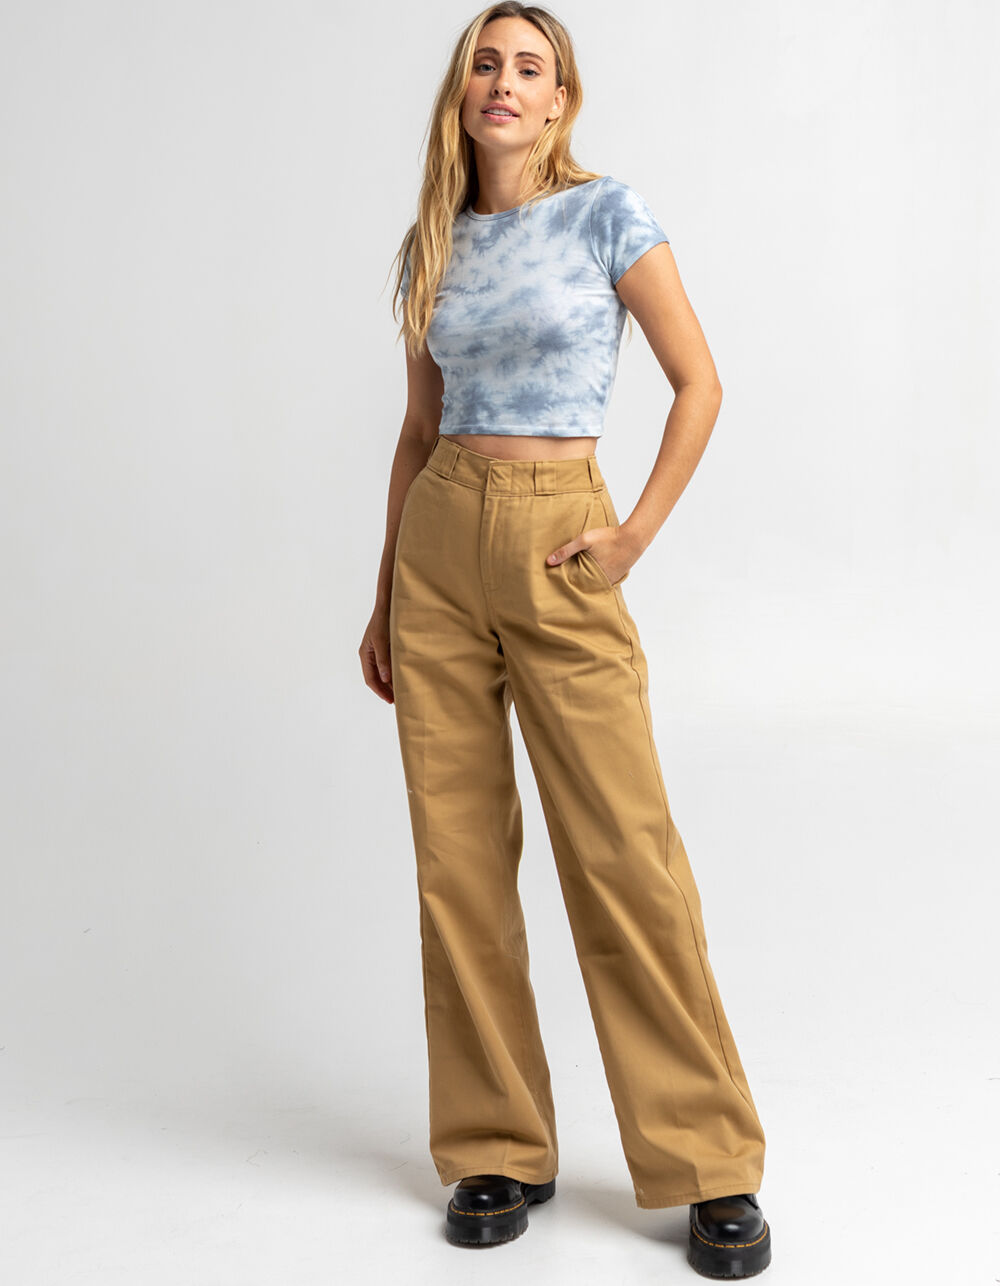 Women's Bottoms  Baggy jeans for women, Dickies pants outfits